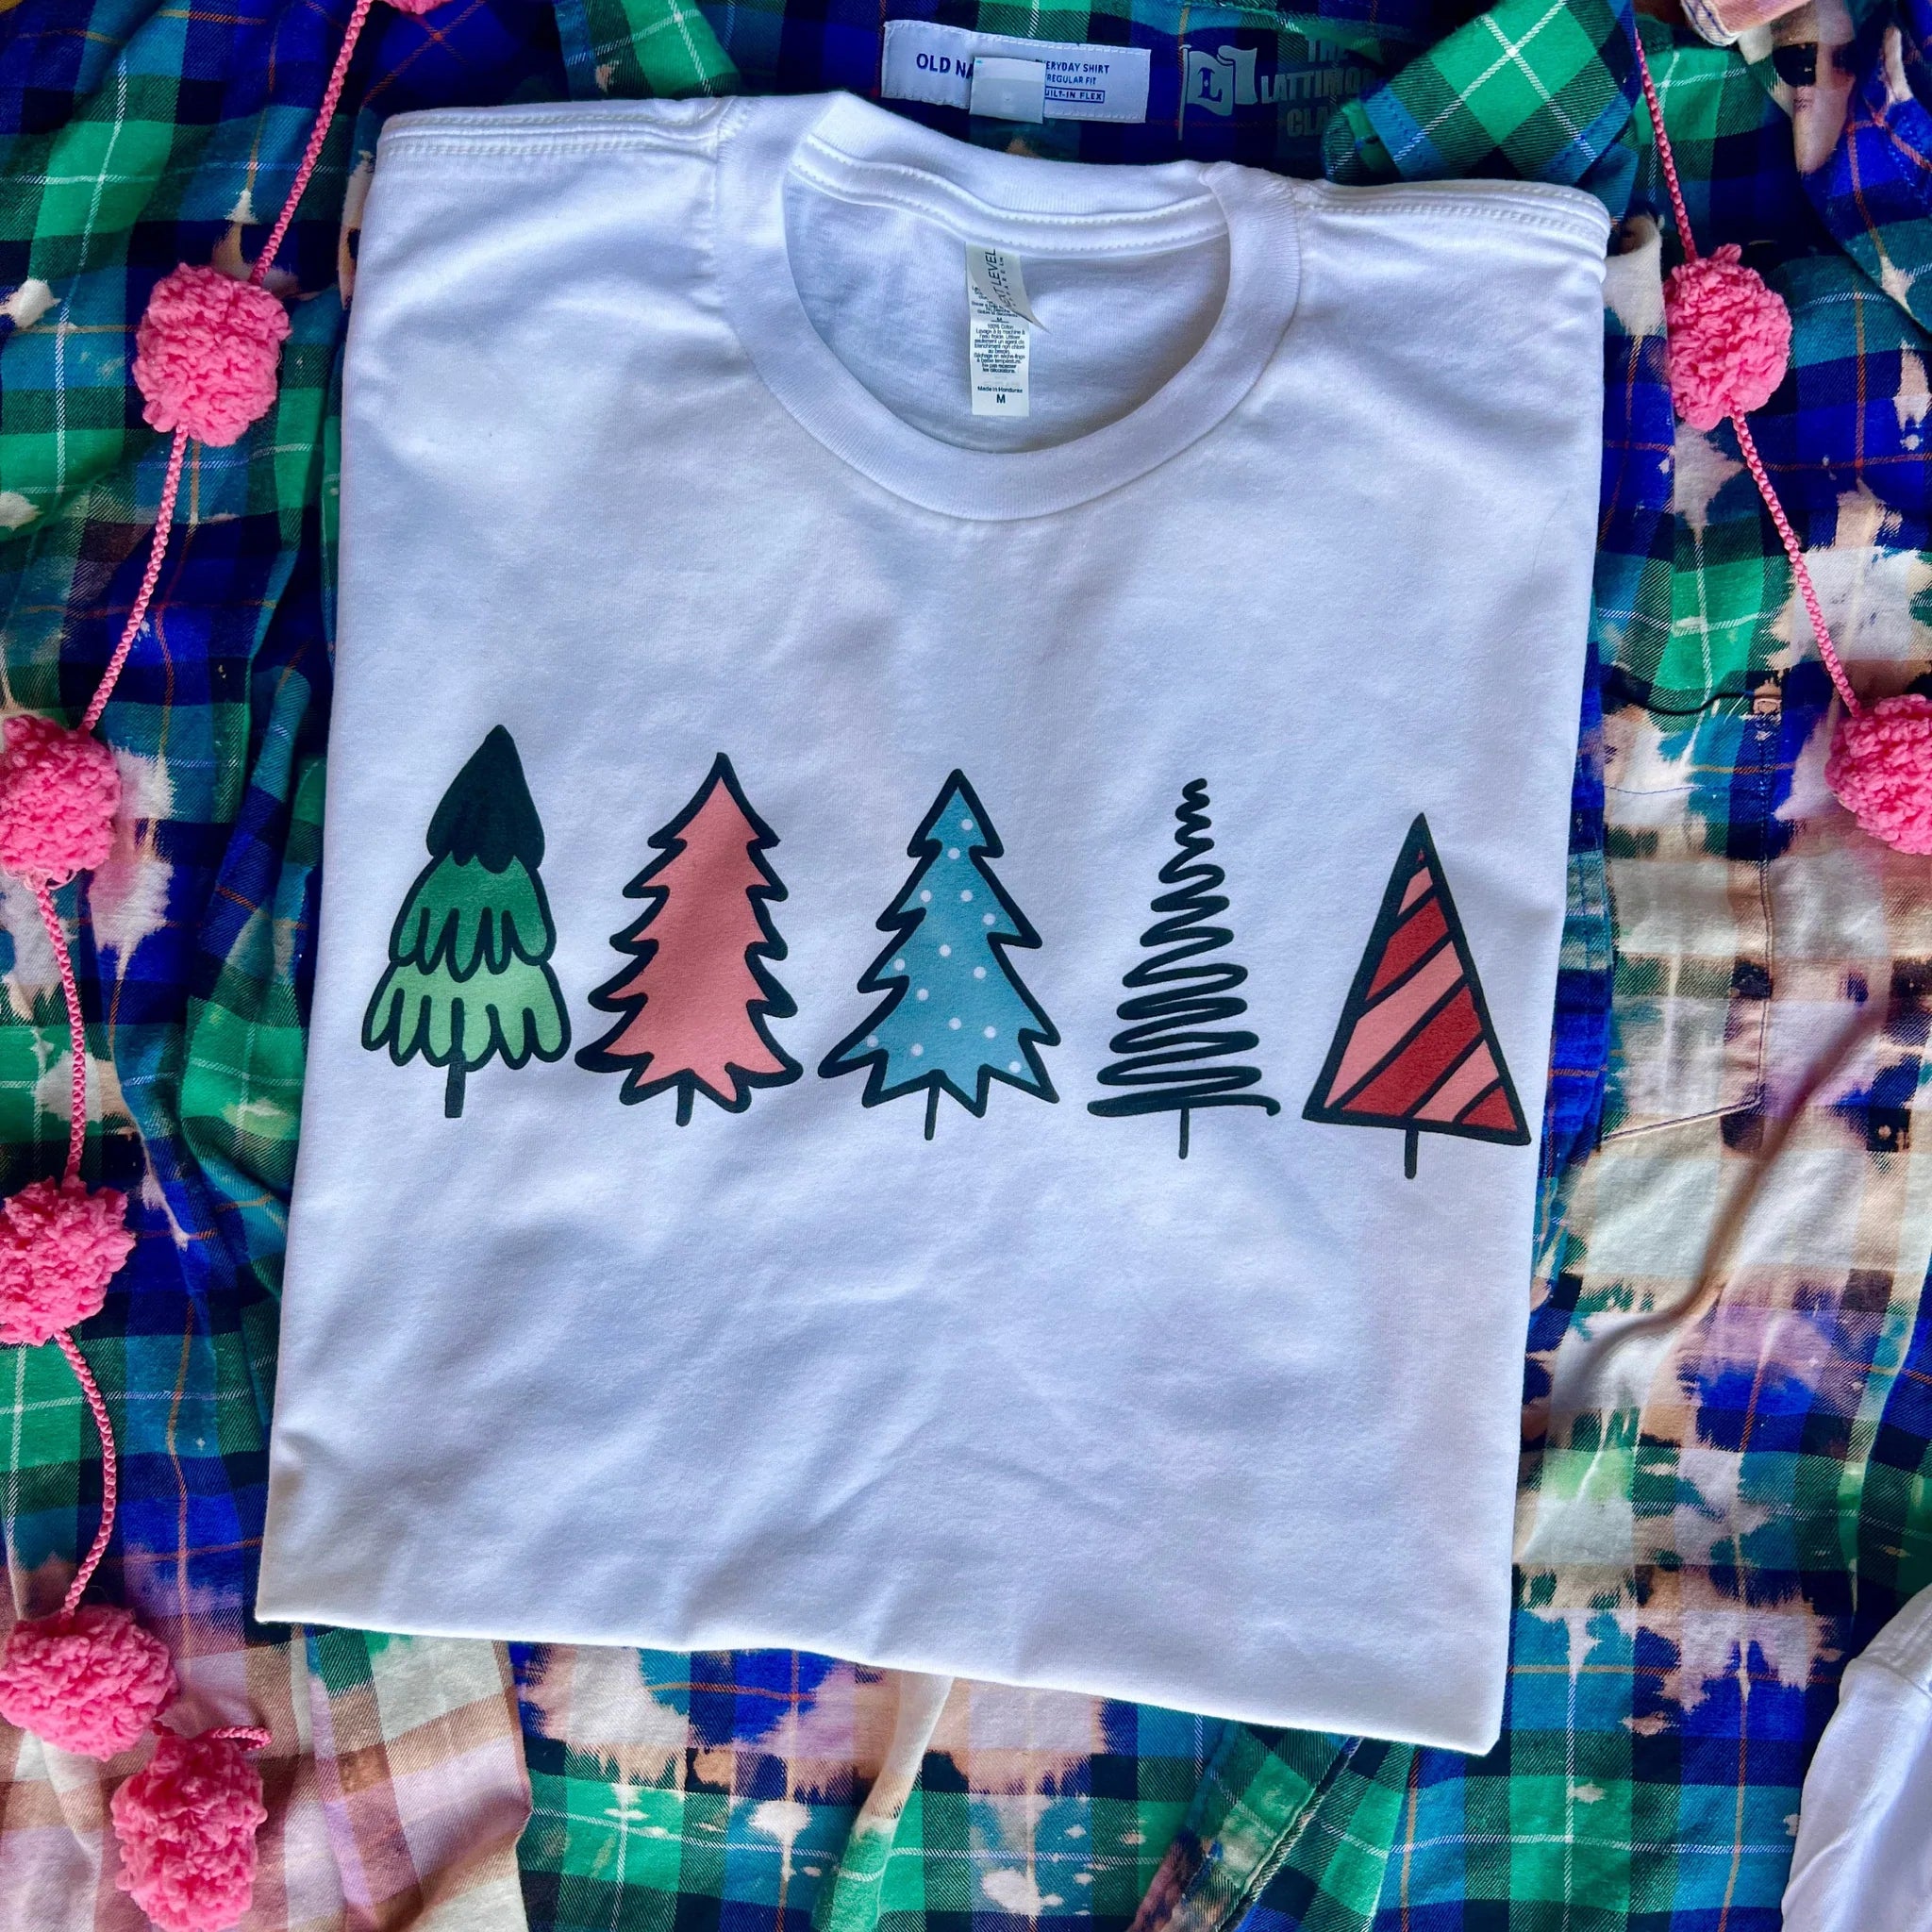 This white tee includes a crew neckline, short sleeves, and a cute Christmas graphic of five Christmas trees with different colors and prints. This is shown here as a folded flat lay. 